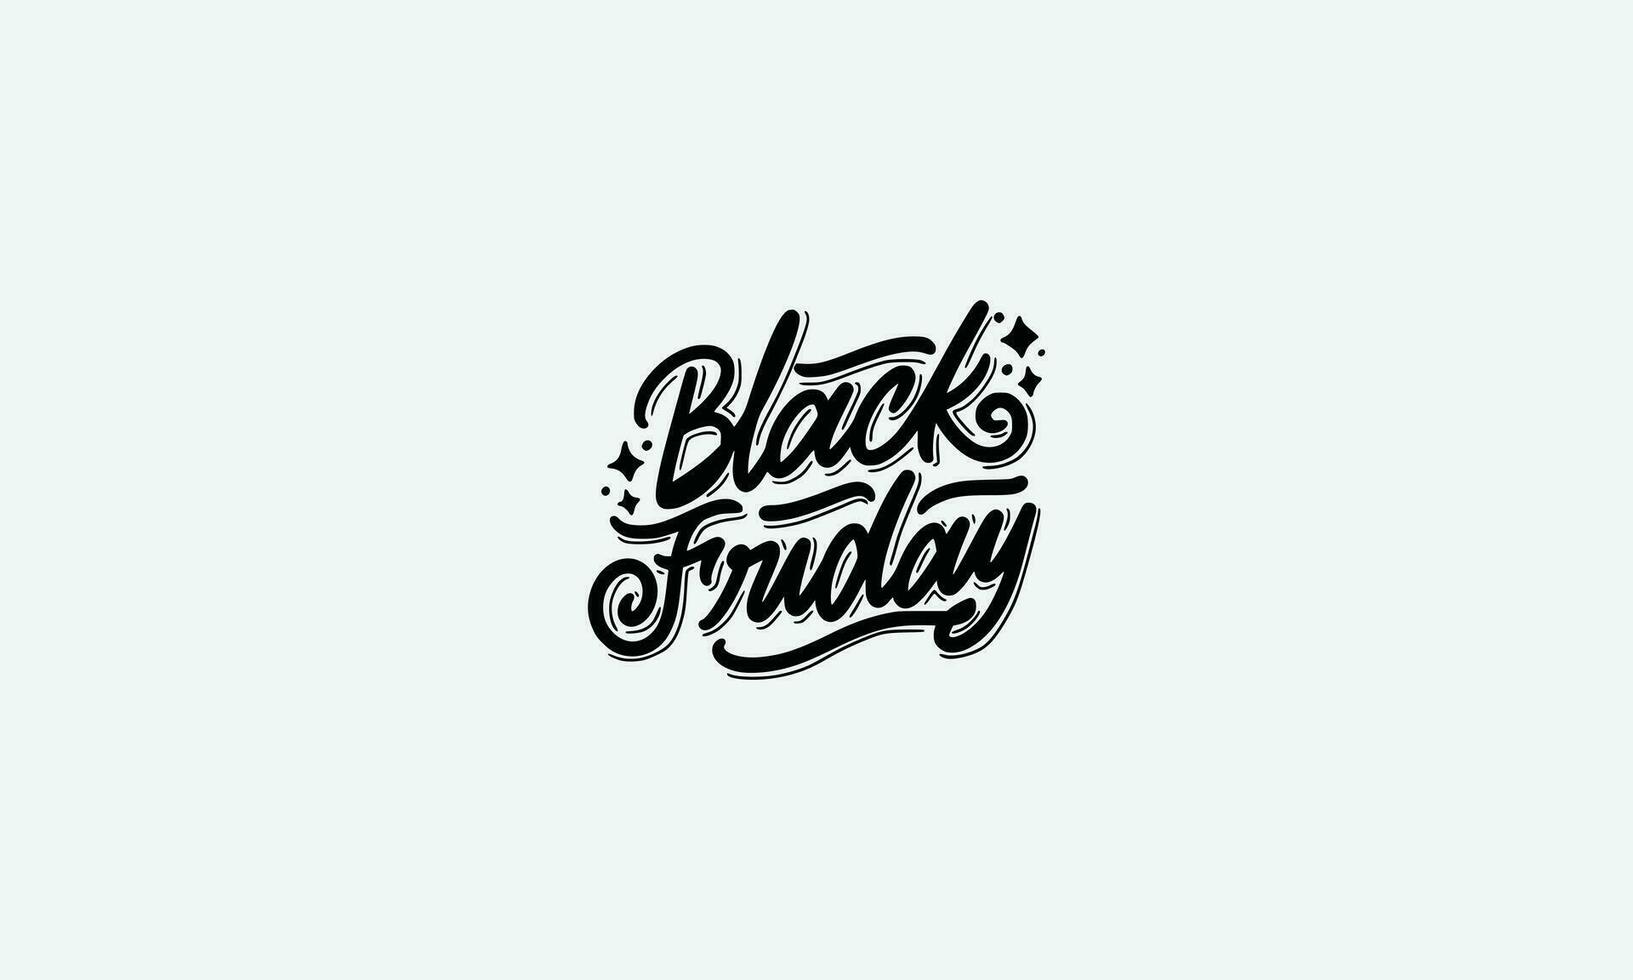 Black Friday sale and discounts vector